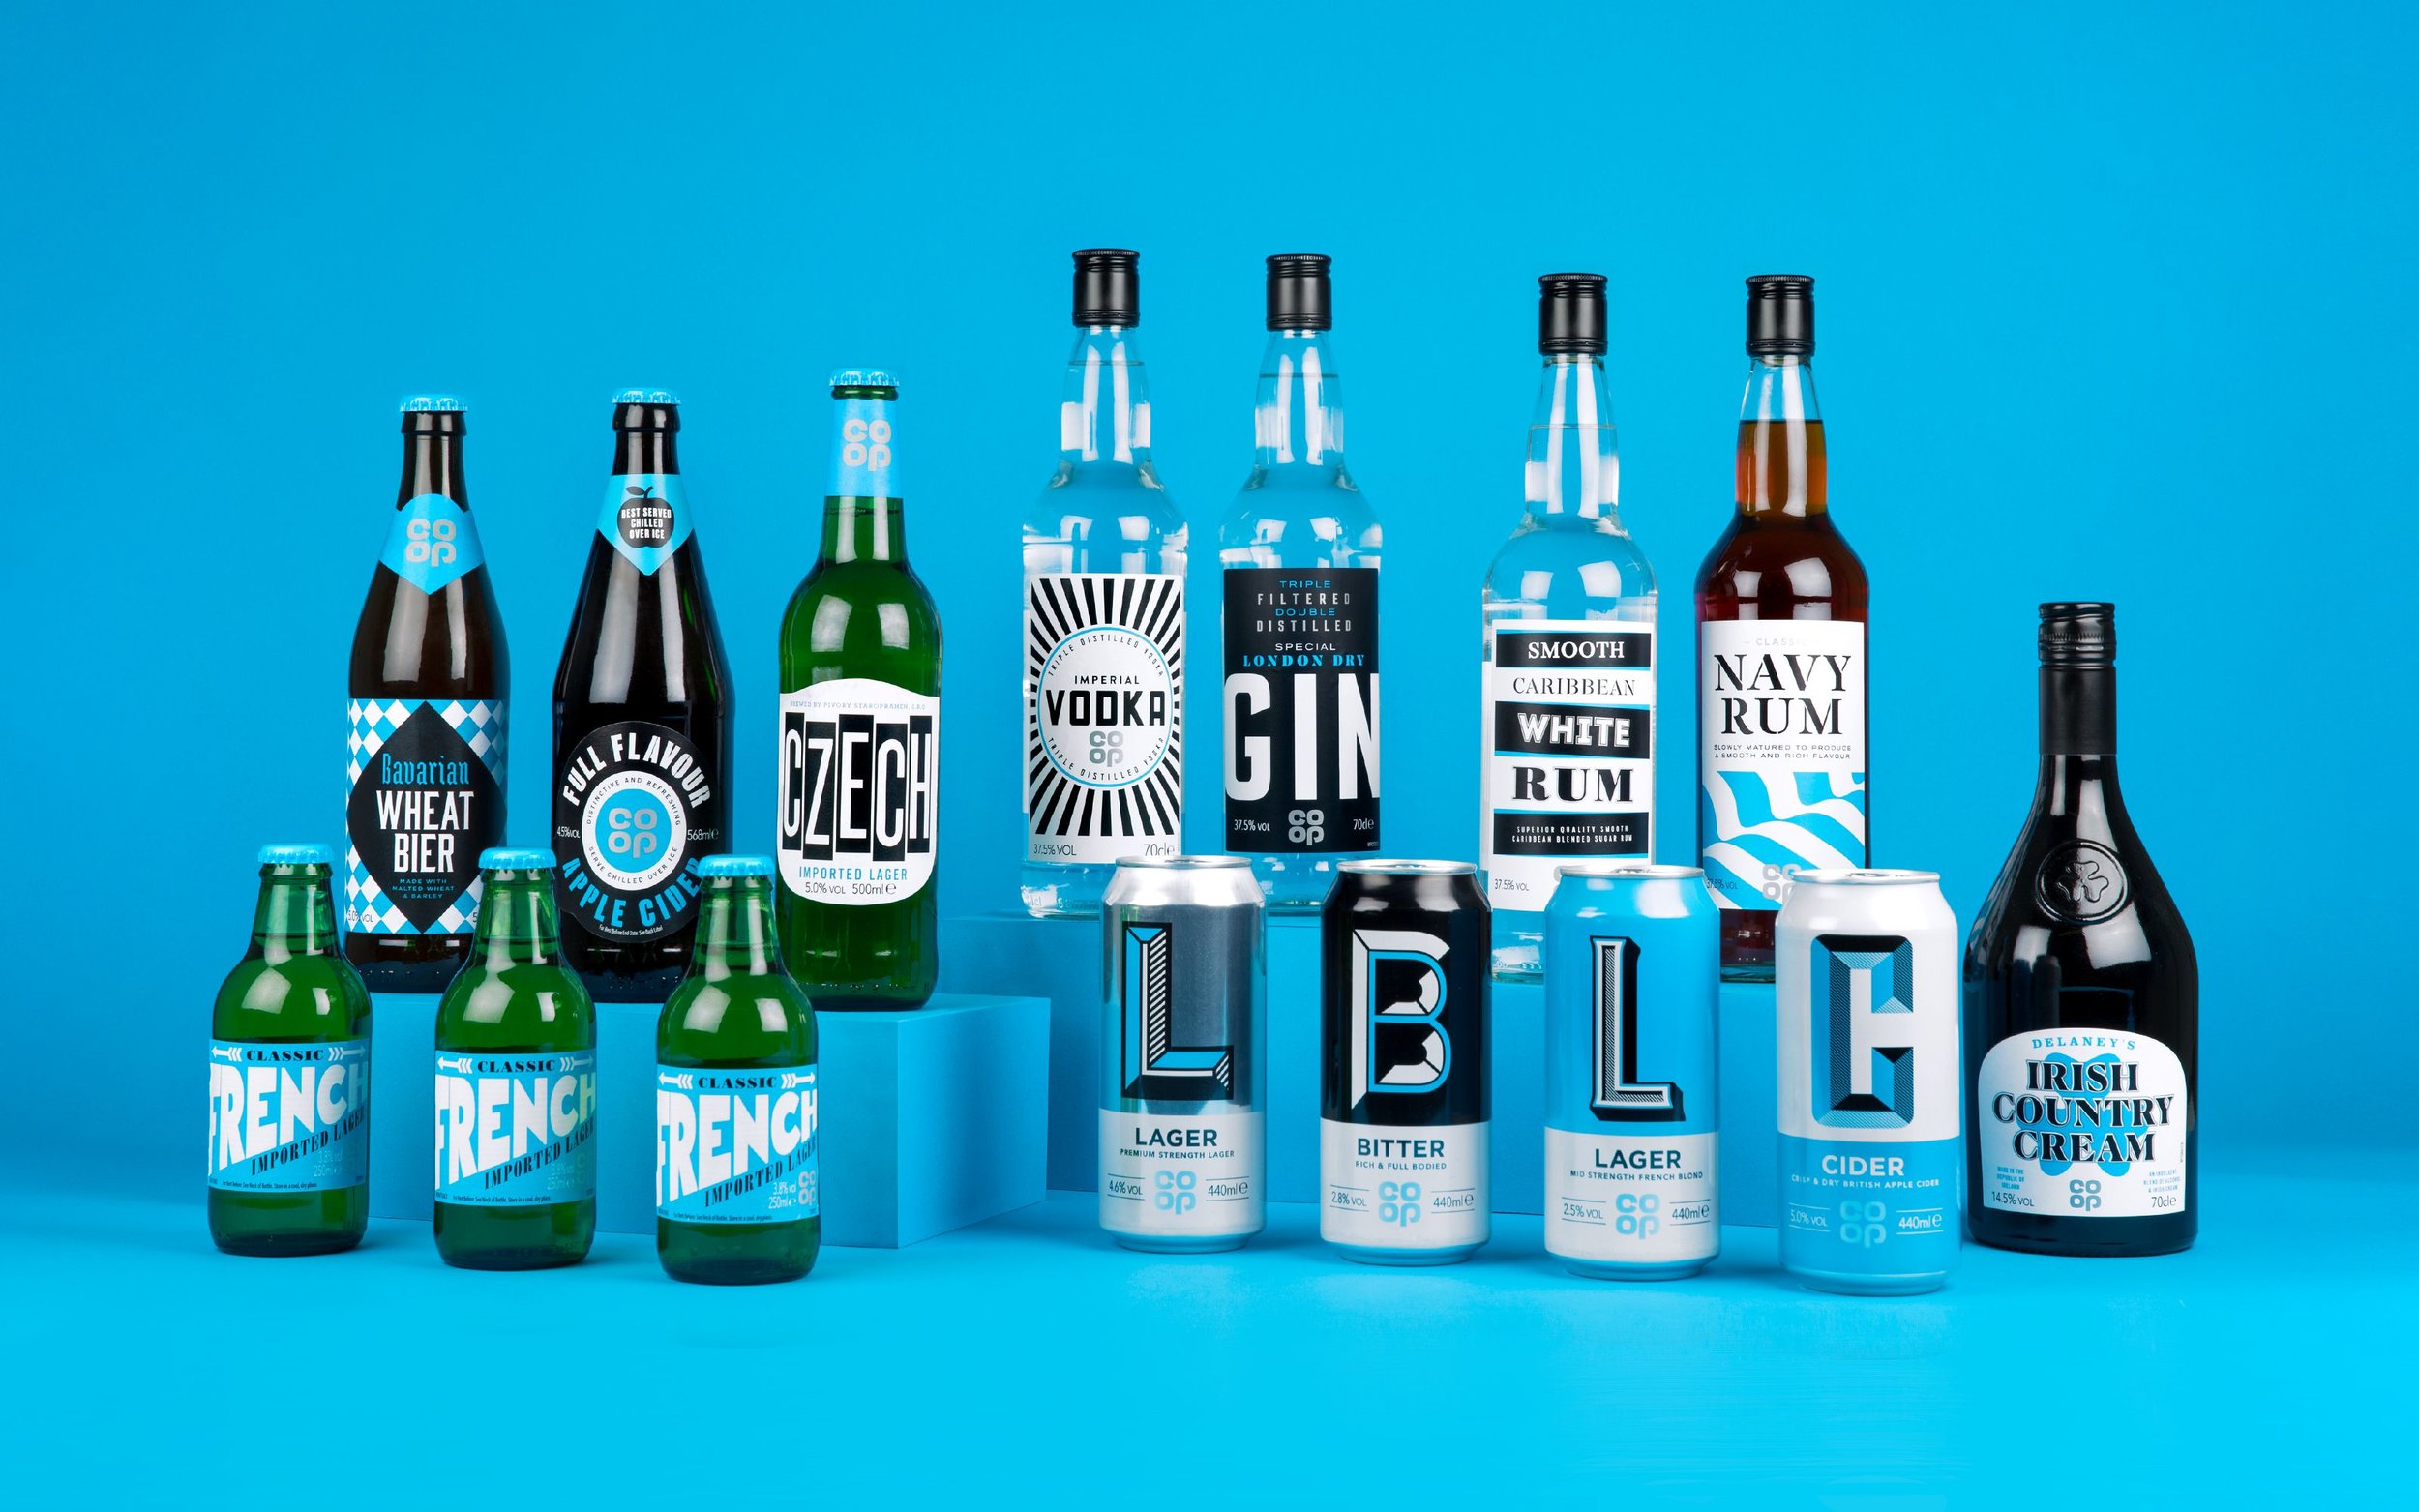  Robot Food Redesign Co-op’s Own-Brand Beers, Ciders and Spirits Range